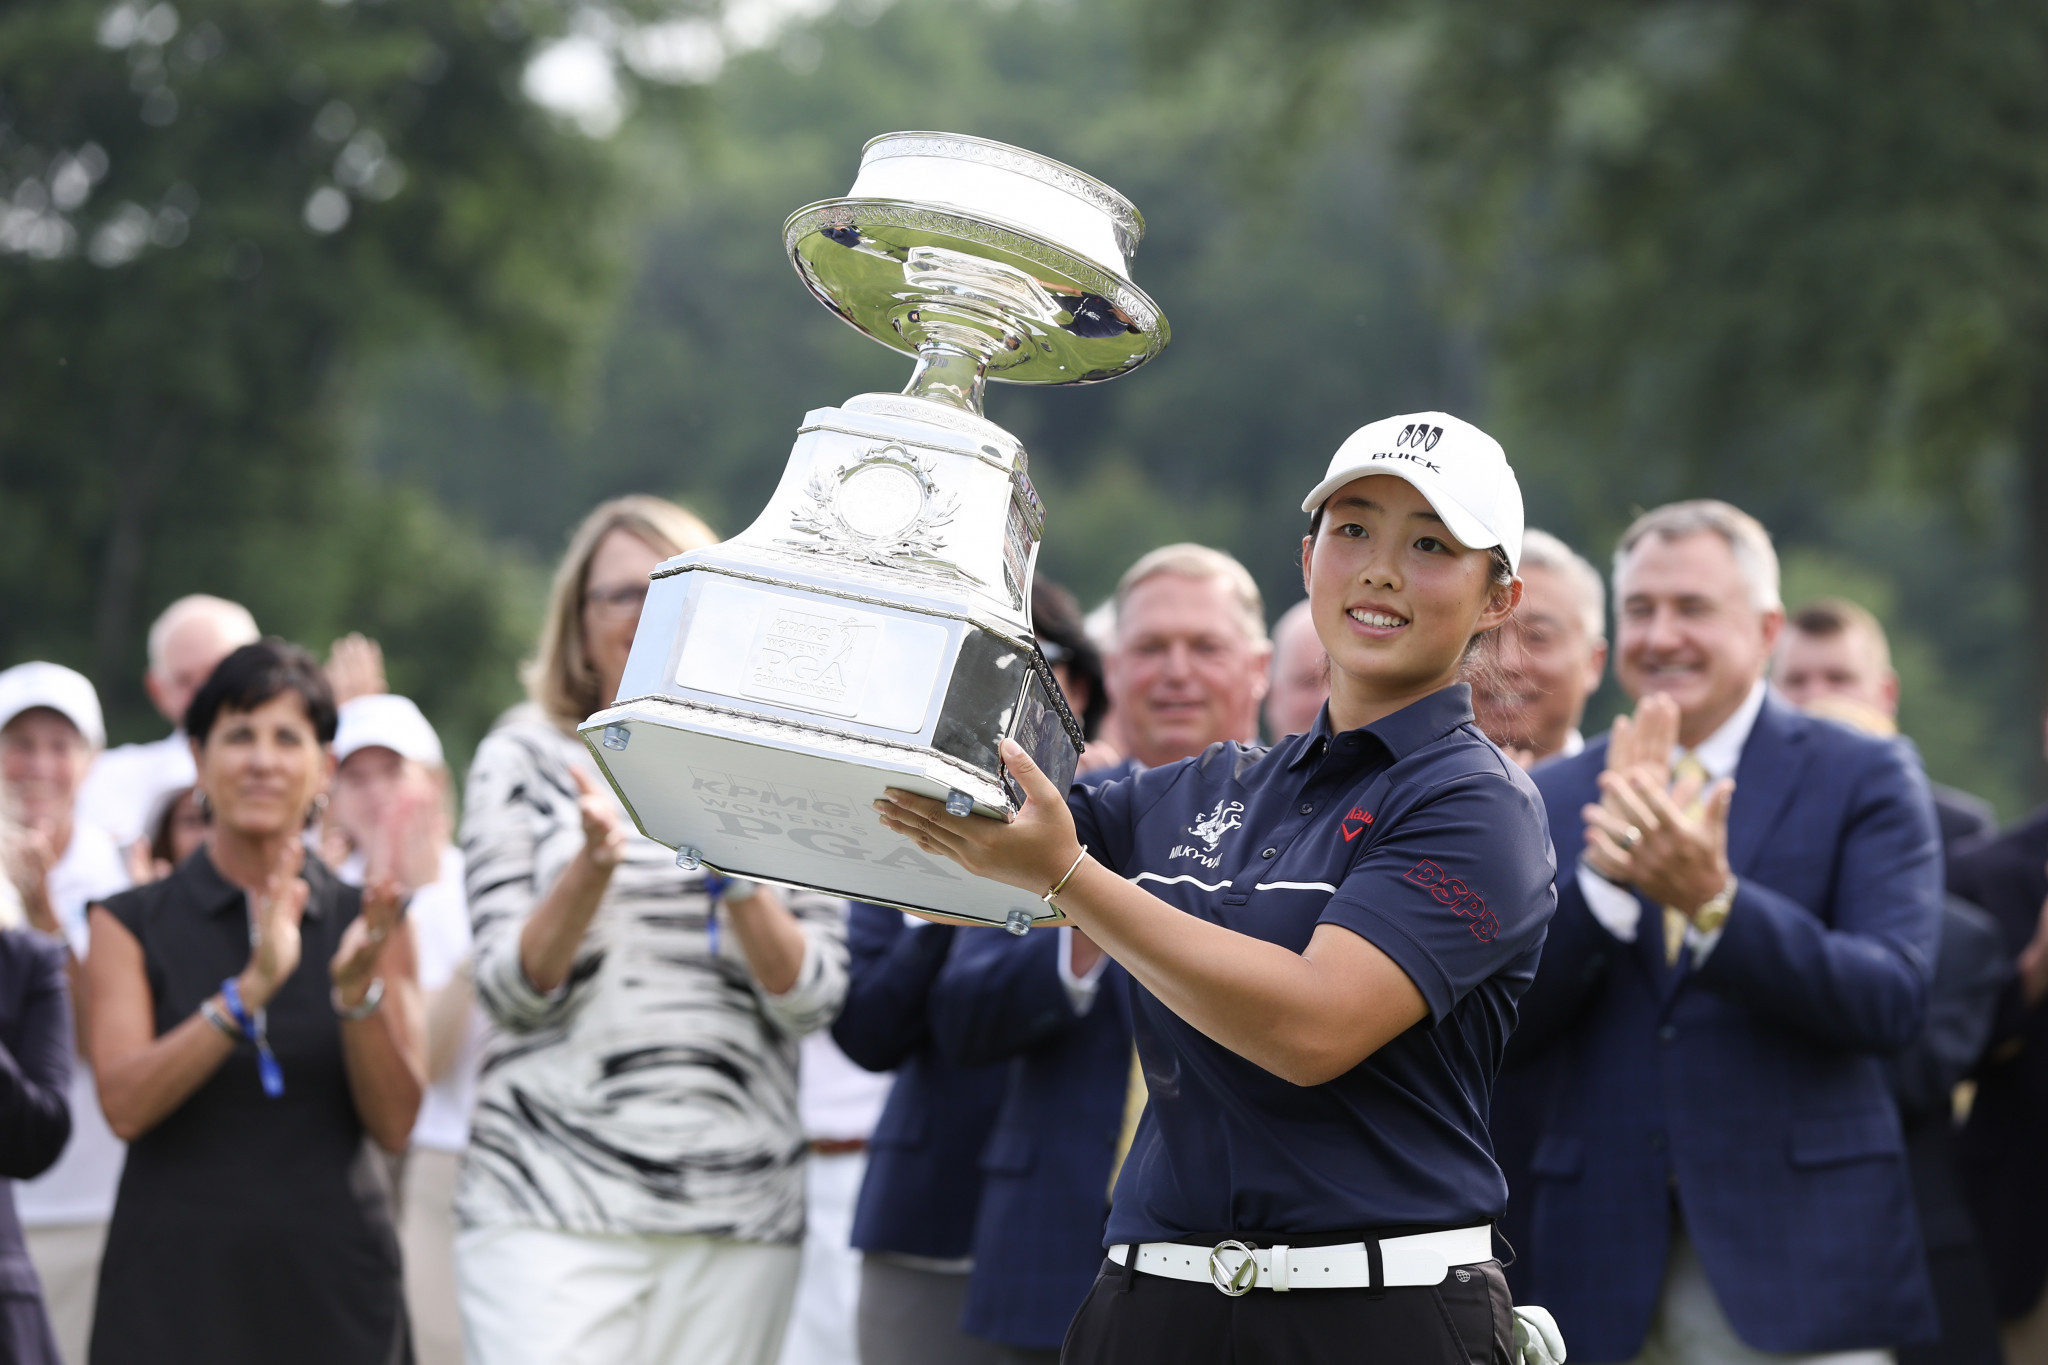 China's Yin Ruoning lifts the Women's PGA Championship trophy after coming out on top in a dramatic final day in New Jersey ©Getty Images